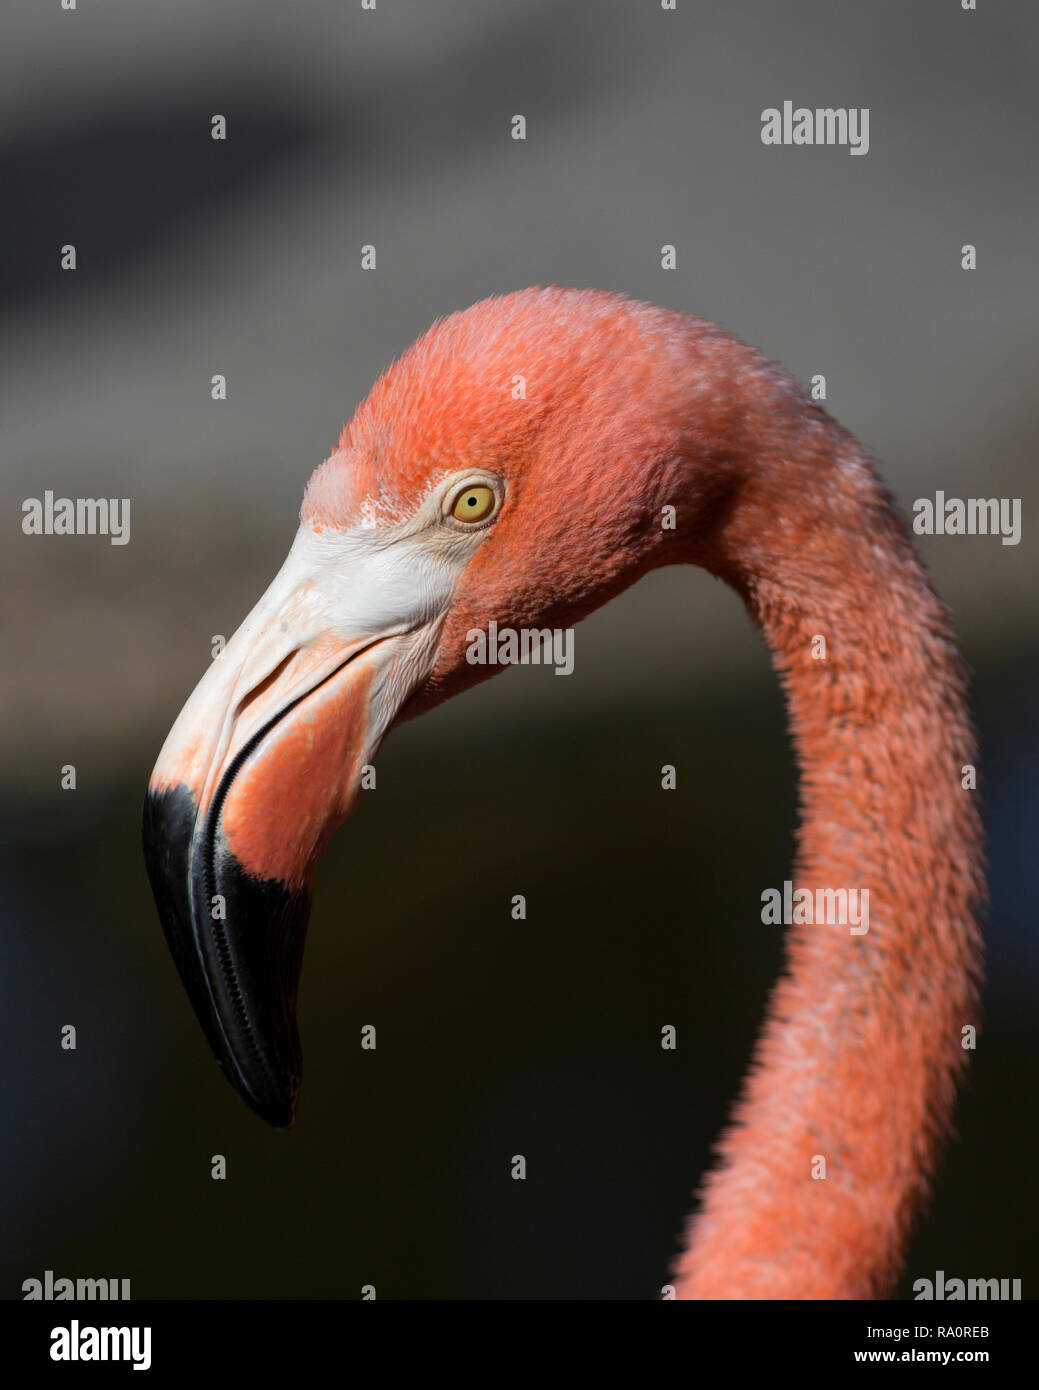 American Flamingo (Phoenicopterus ruber)  in a close up face portrait with a stern gaze, USA Florida Stock Photo